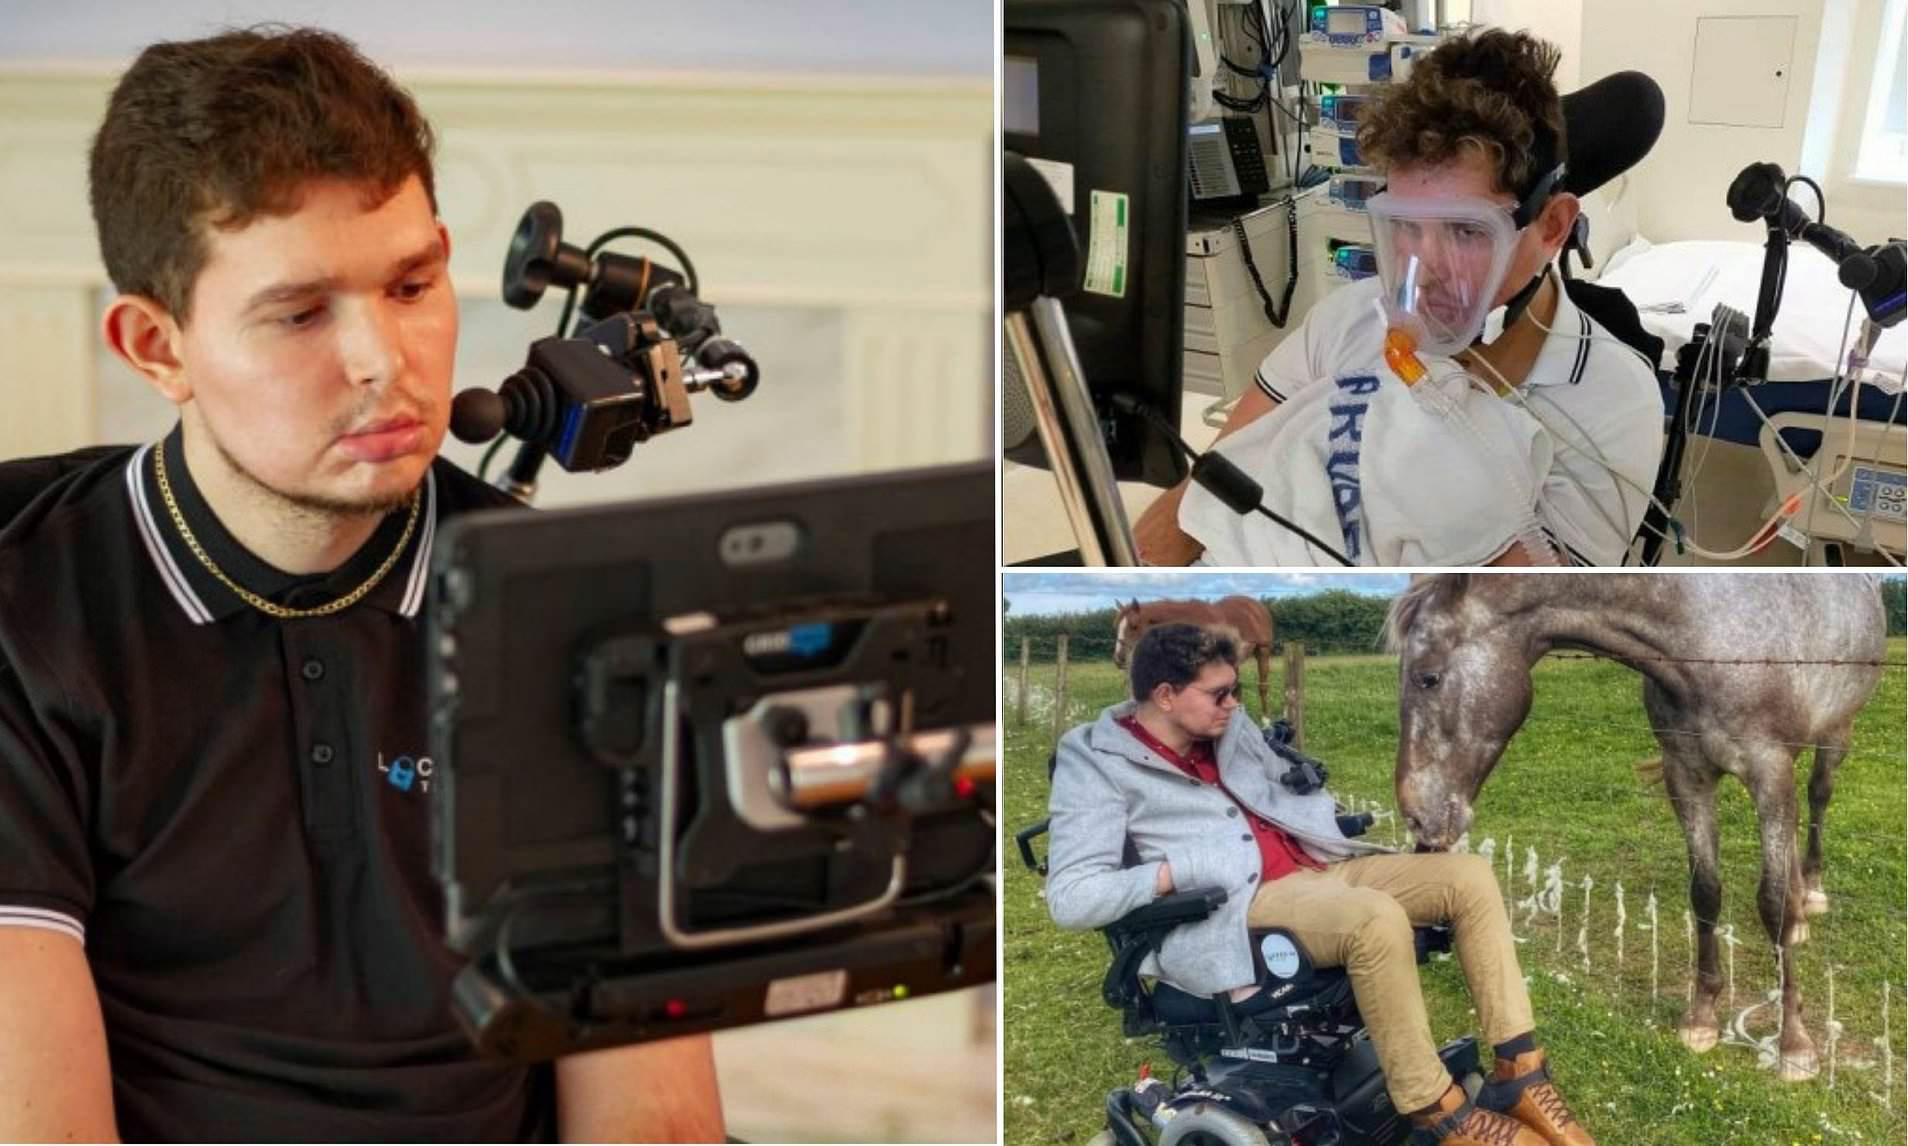 Man with locked-in syndrome completes book using just his EYES